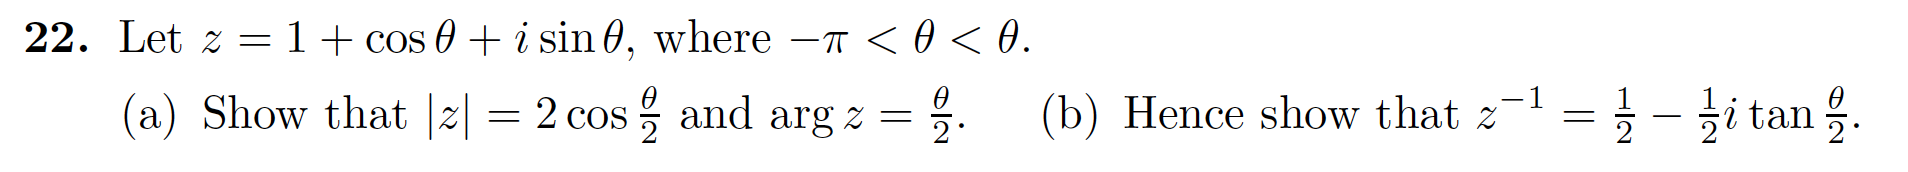 1+cos i sin 0, where -T <0< 0.
22. Let z
_-
-1=-itan을
(a) Show that |z
and arg z = 5.
(b) Hence show that z
= 2 cos
